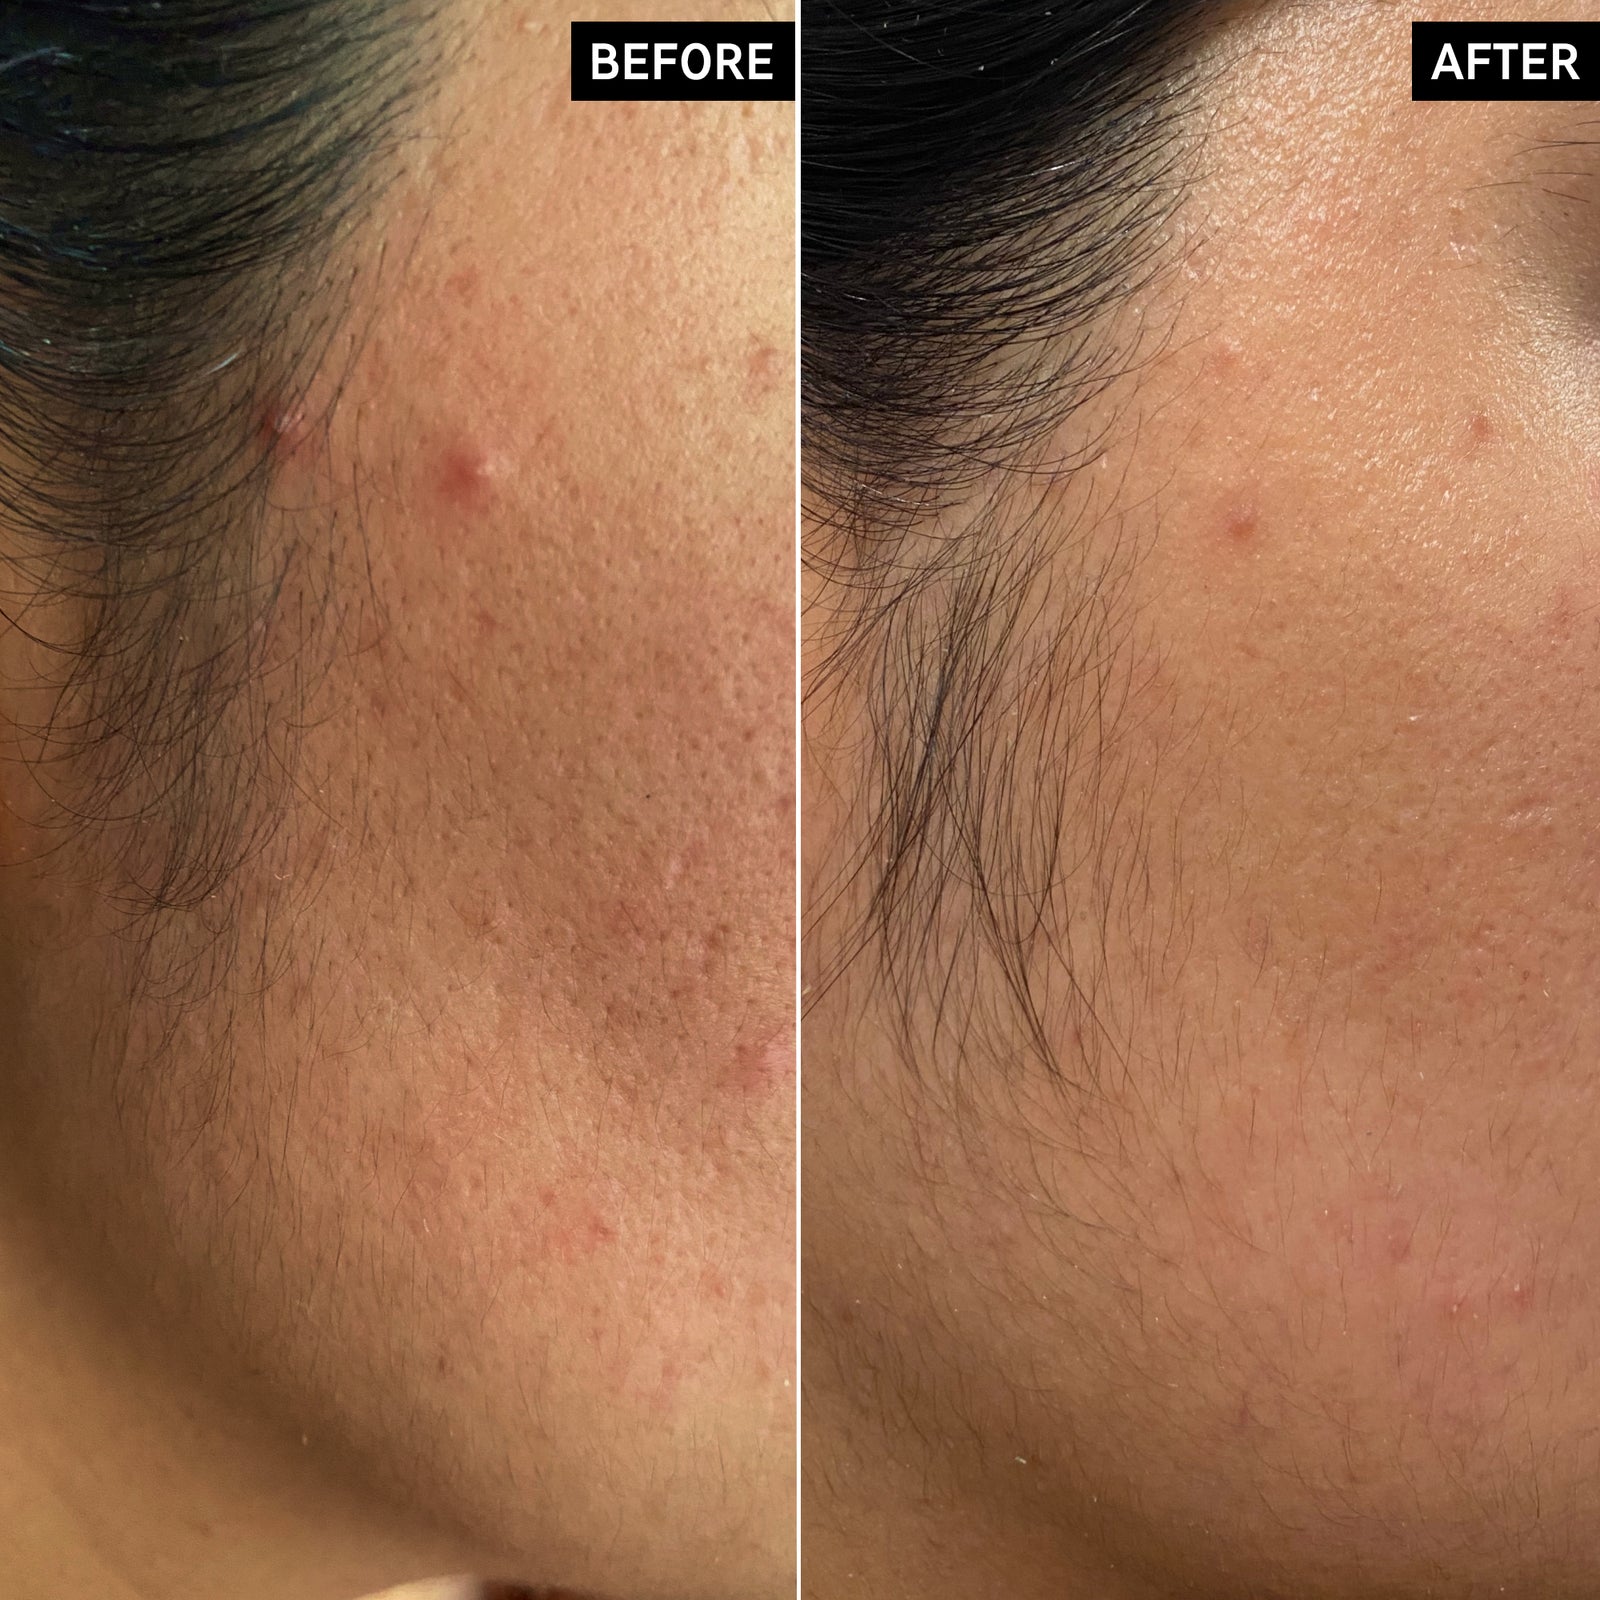 Before and after using Hydrocolloid Invisible Pimple Patches showing reduced blemish gunk